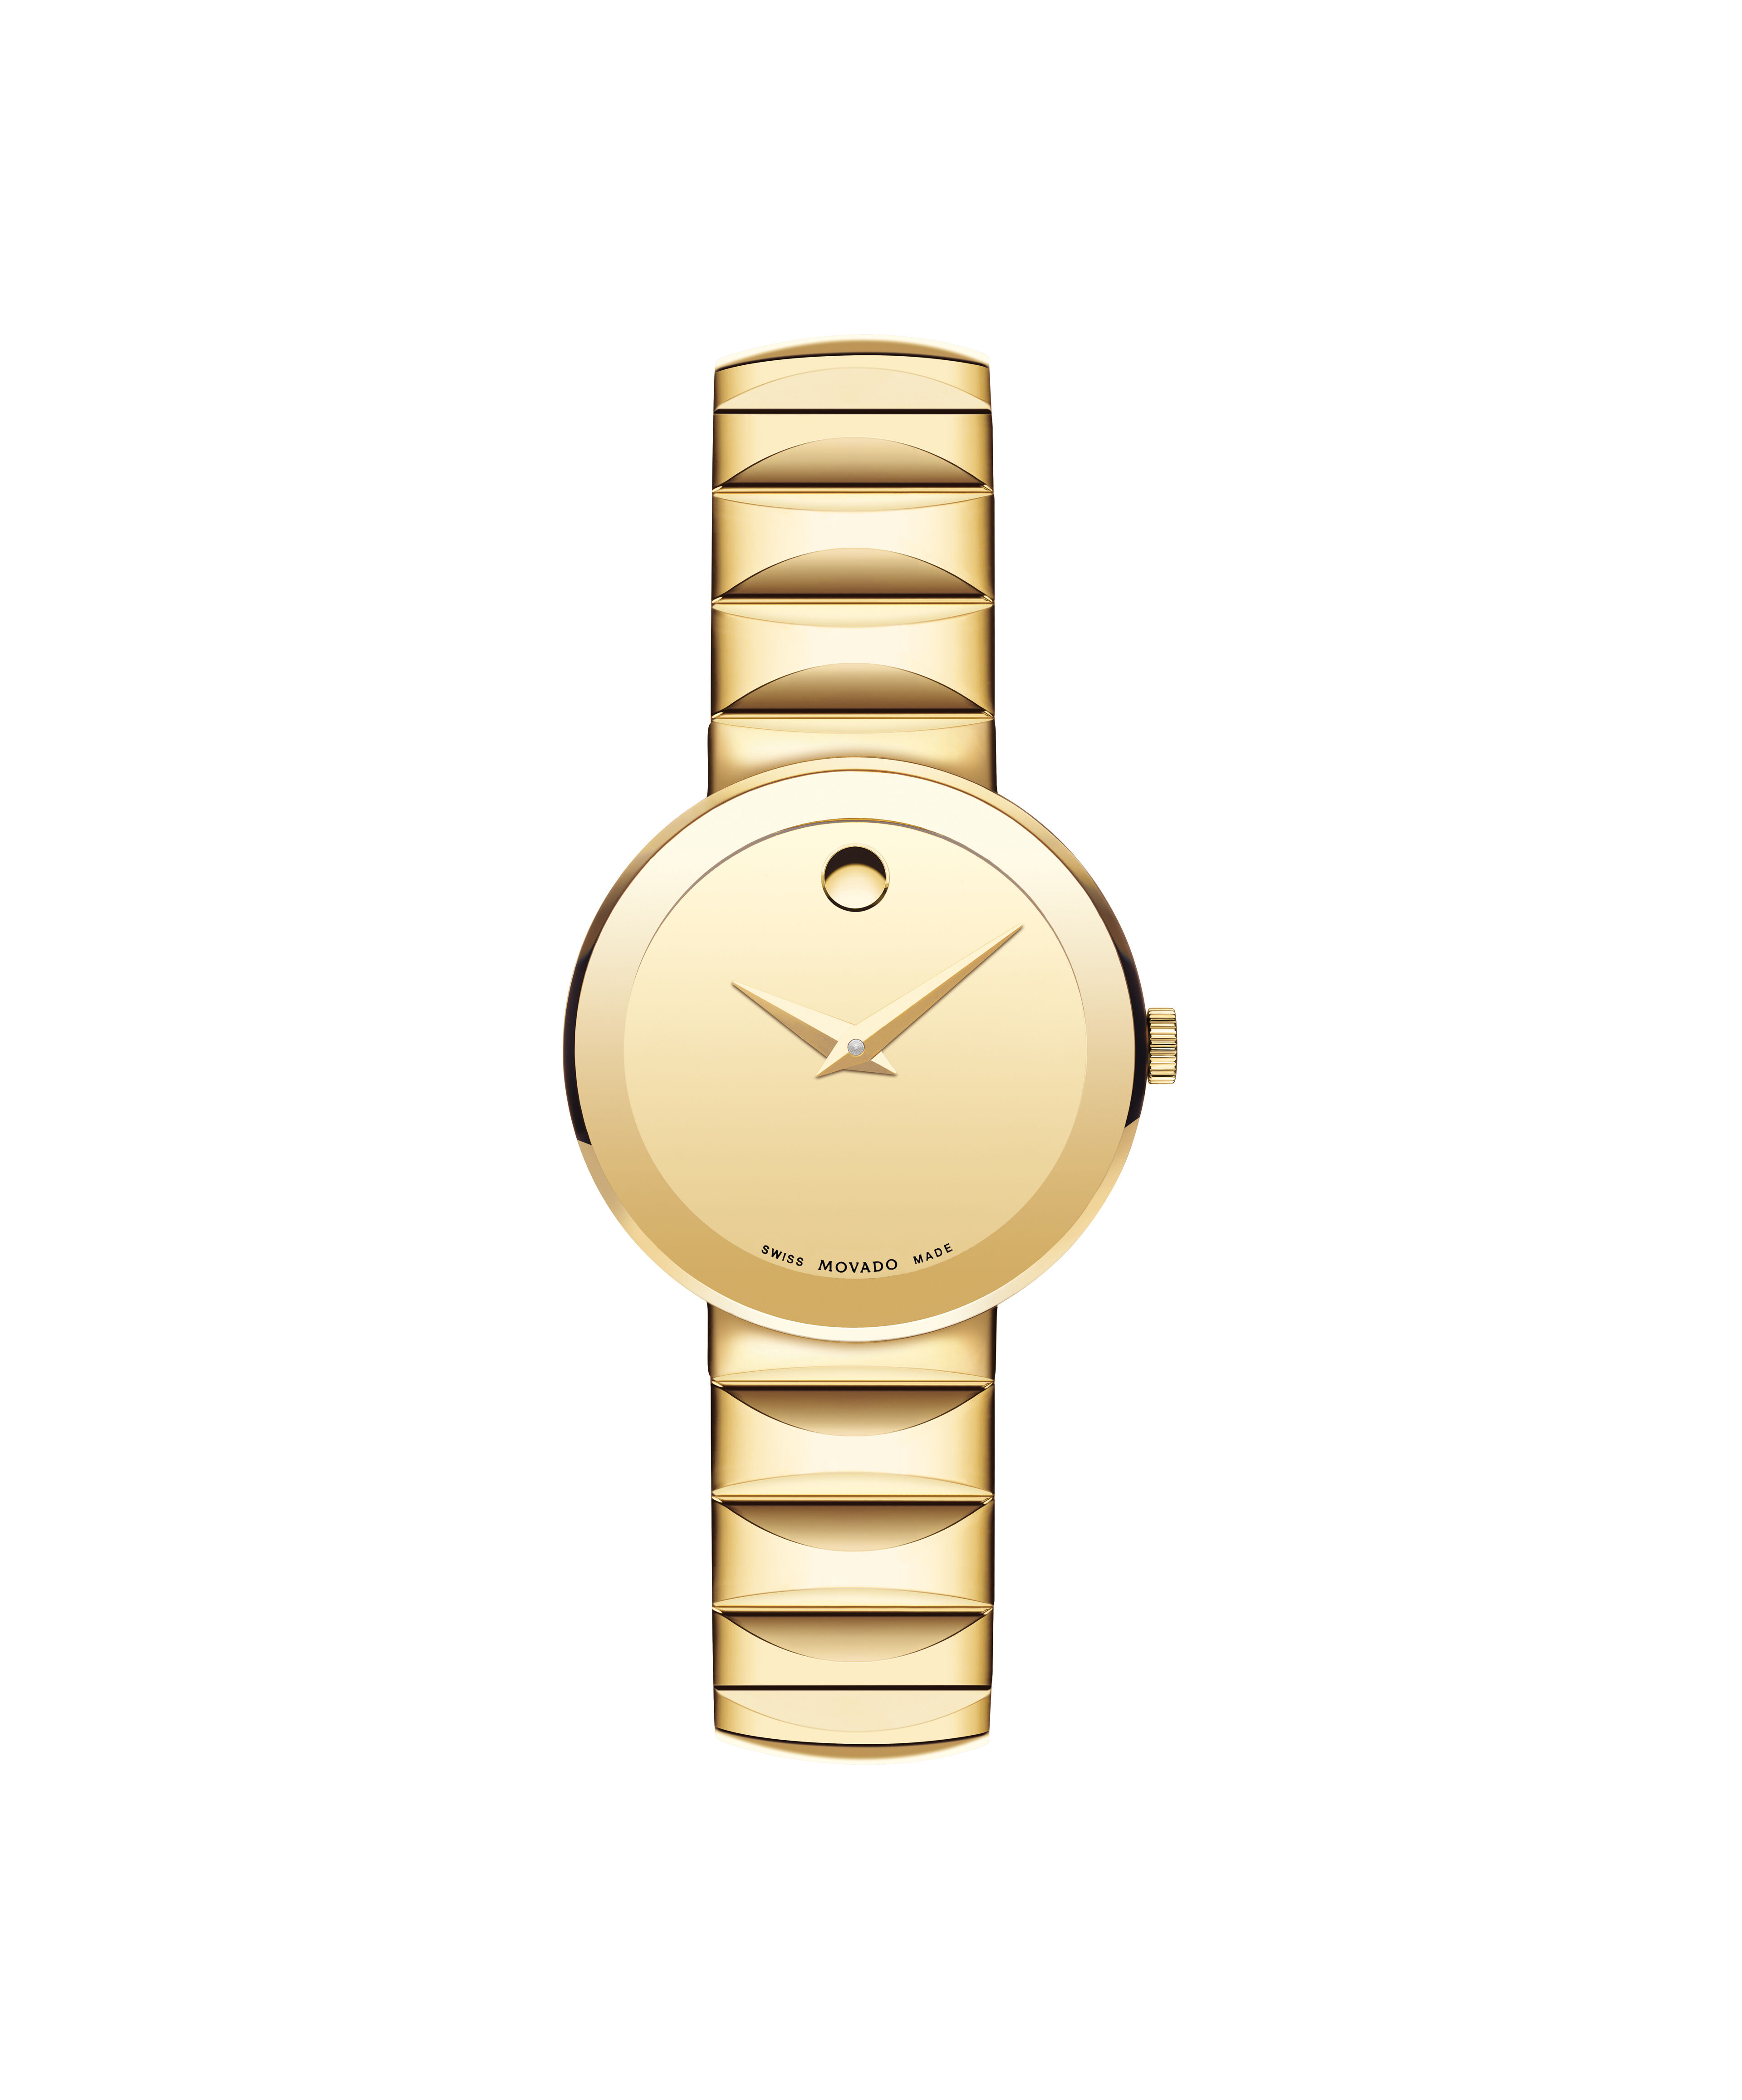 Fake Gold Watches With Diamonds